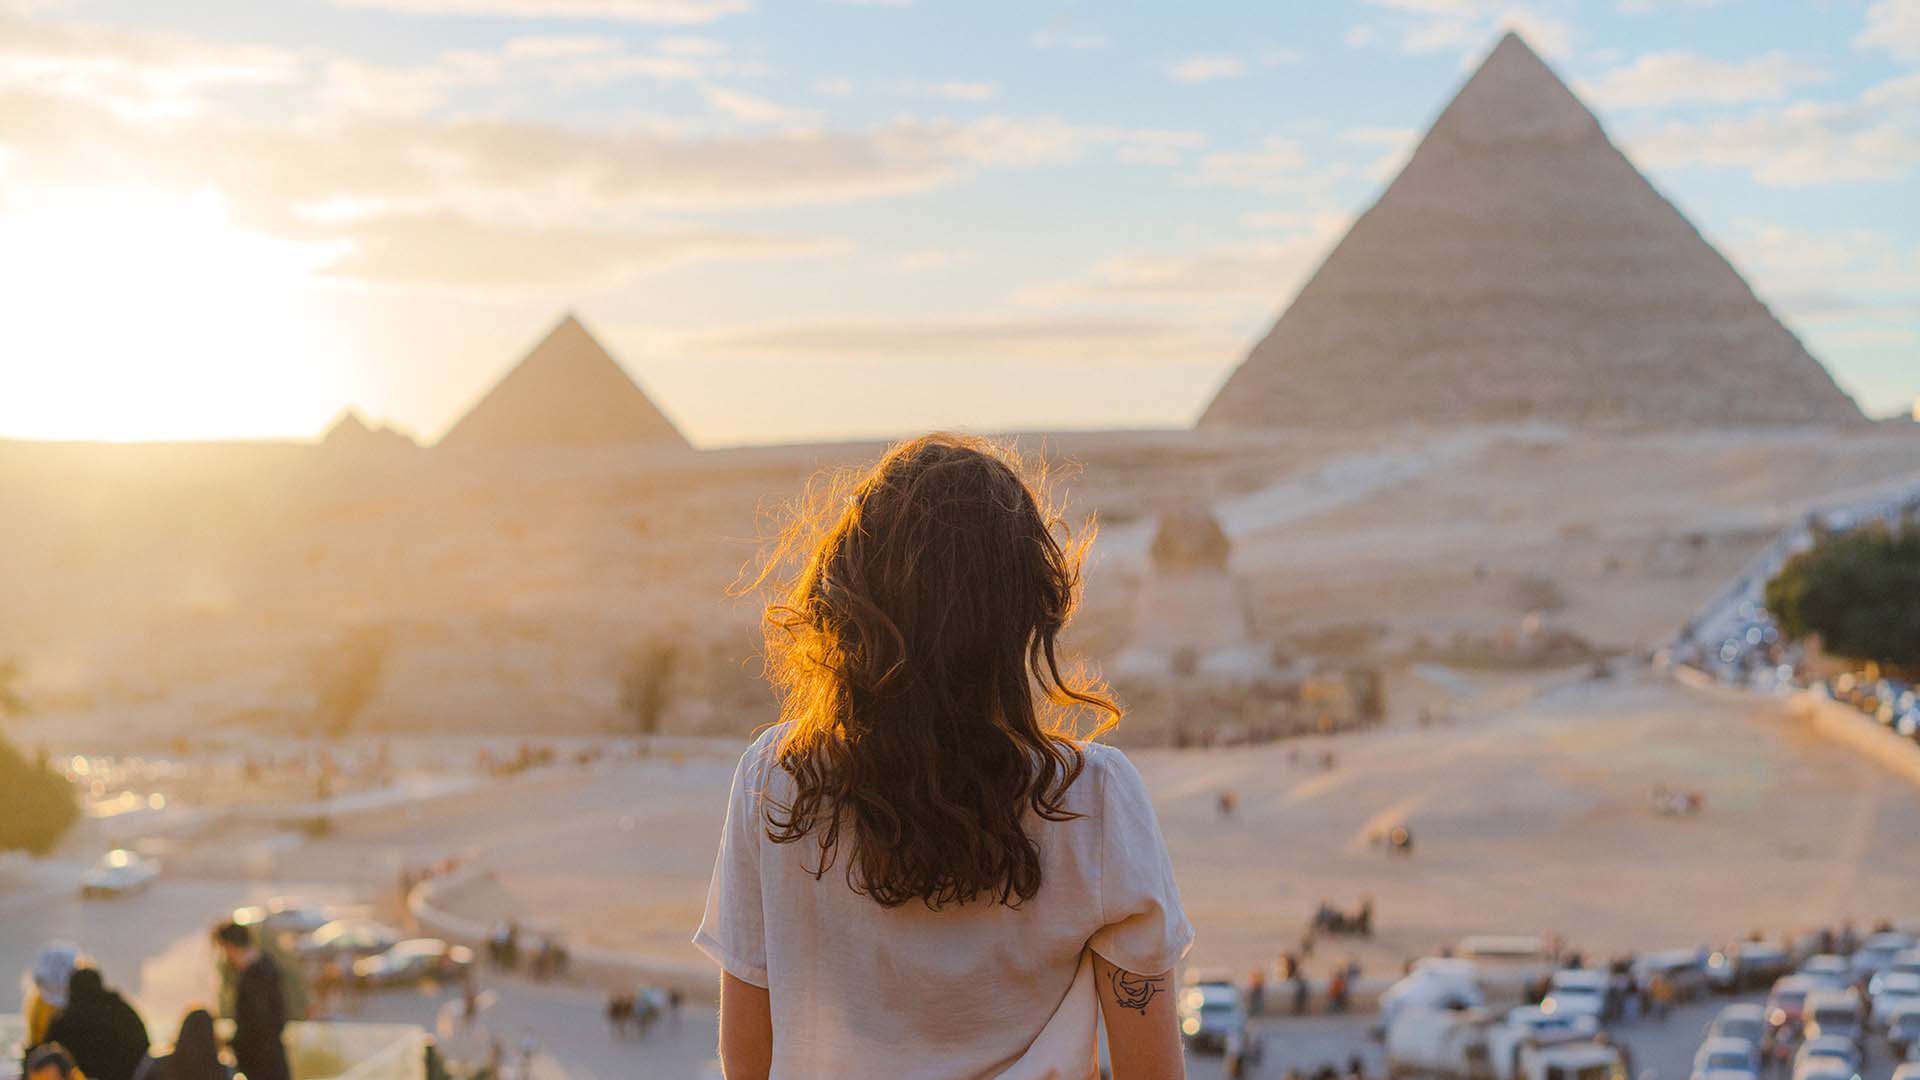 A woman tourist looks towards the Great Pyramids in Cairo, Egypt